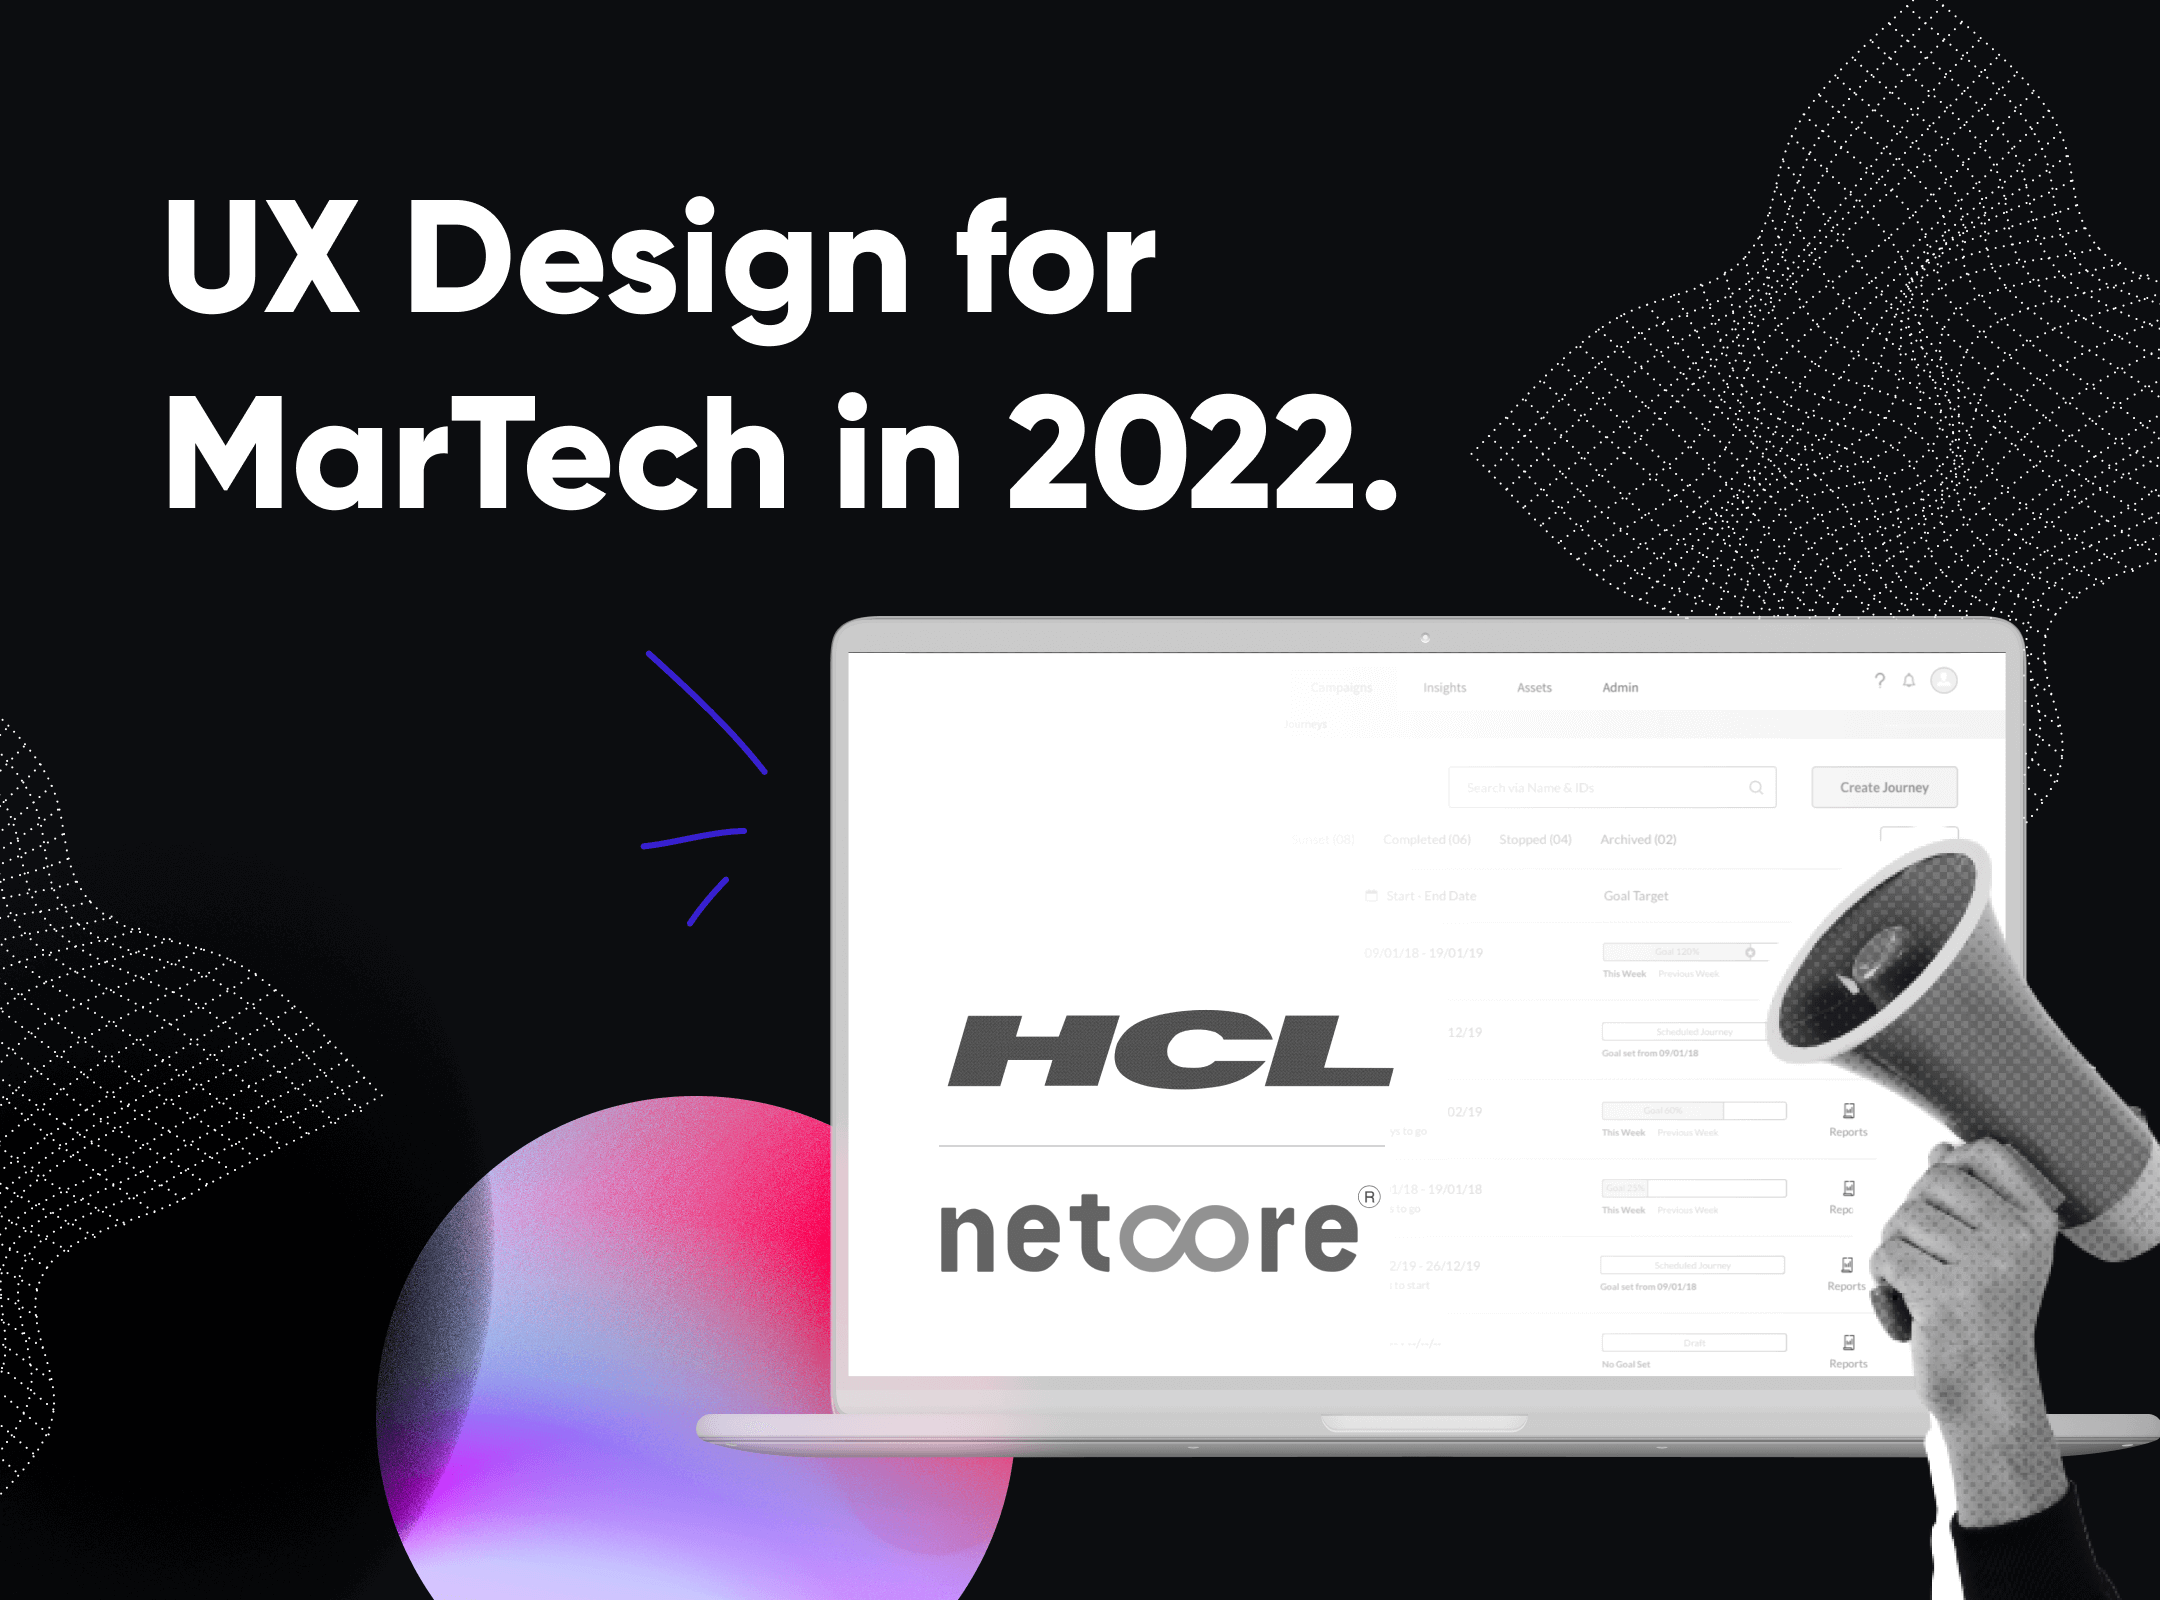 UX Design for MarTech in 2022.